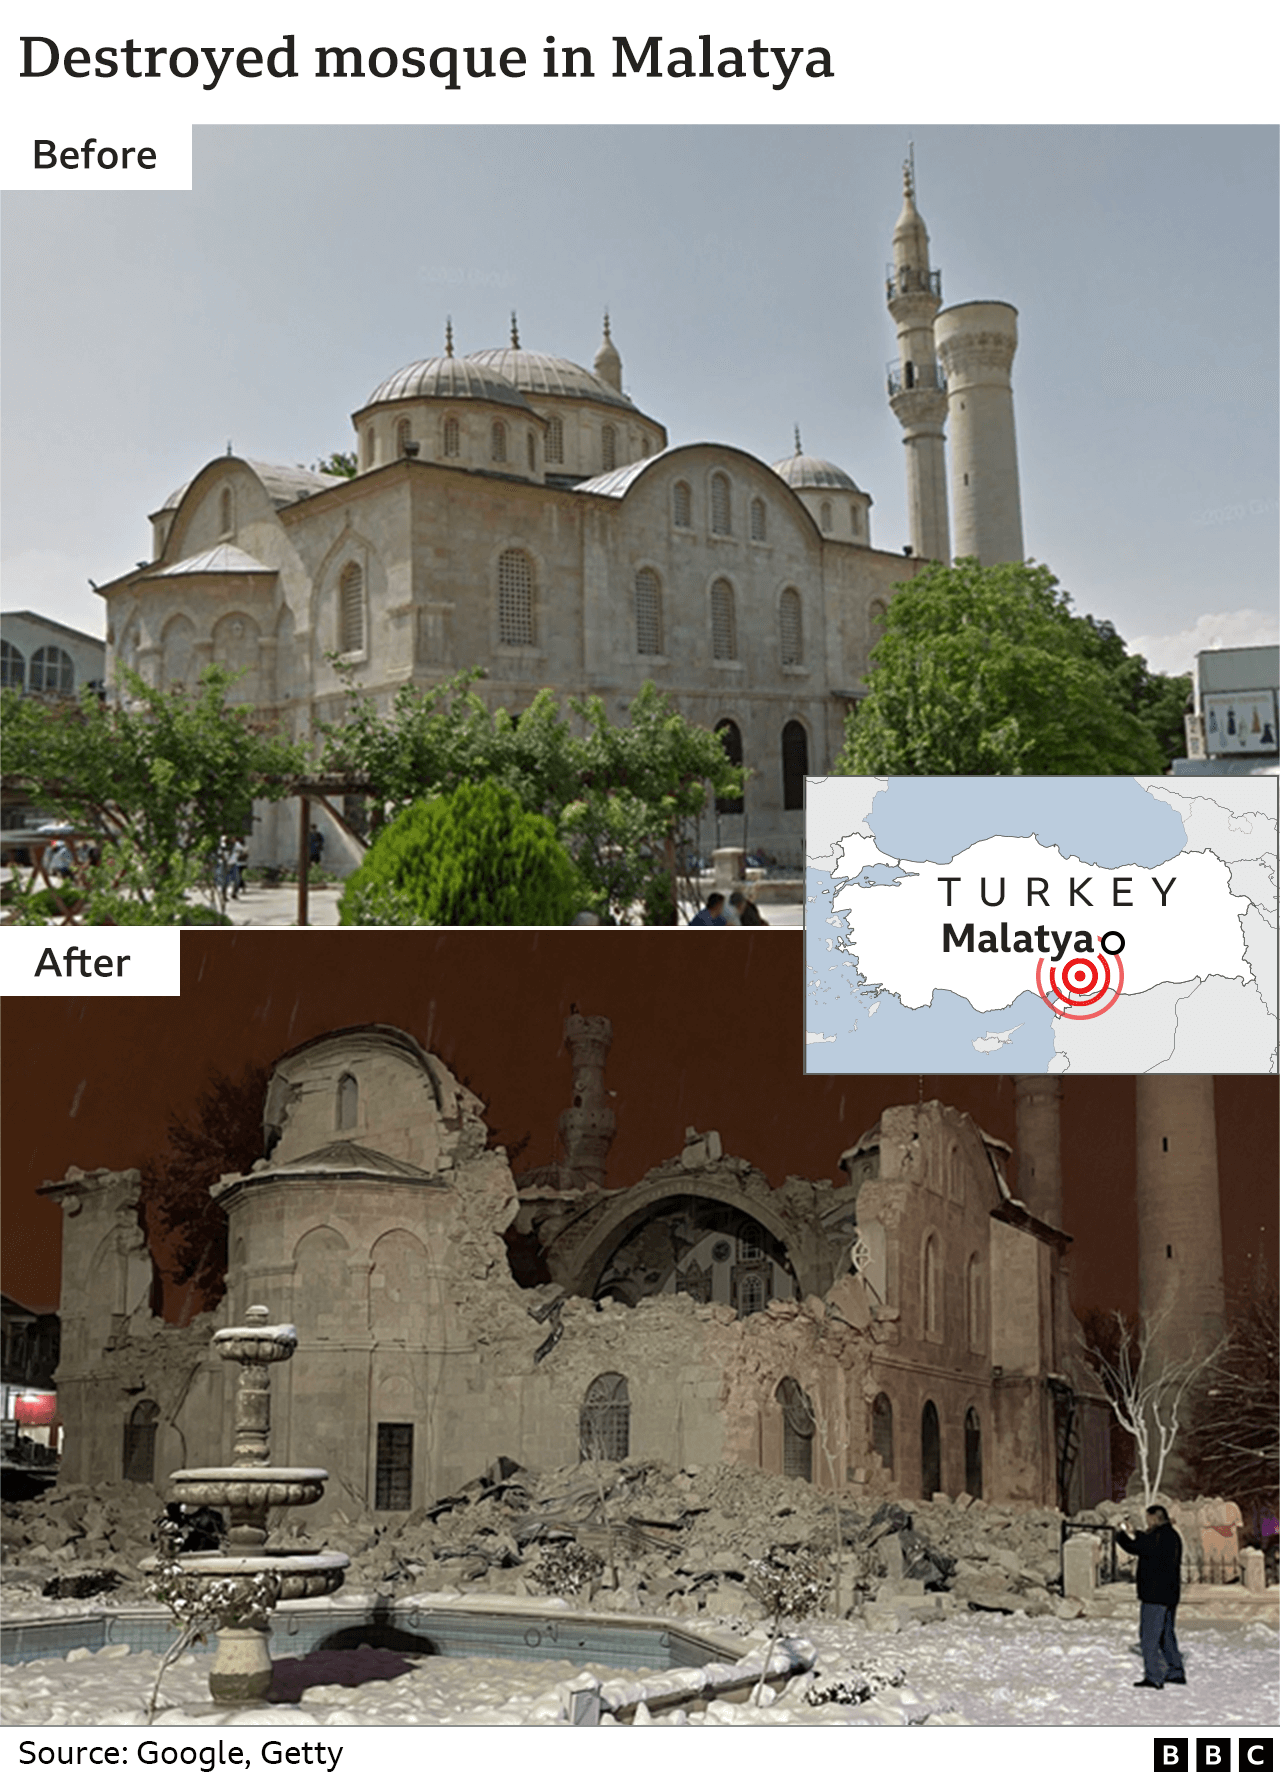 Before and after images showing the destruction of the Yeni mosque in Malatya, Turkey.